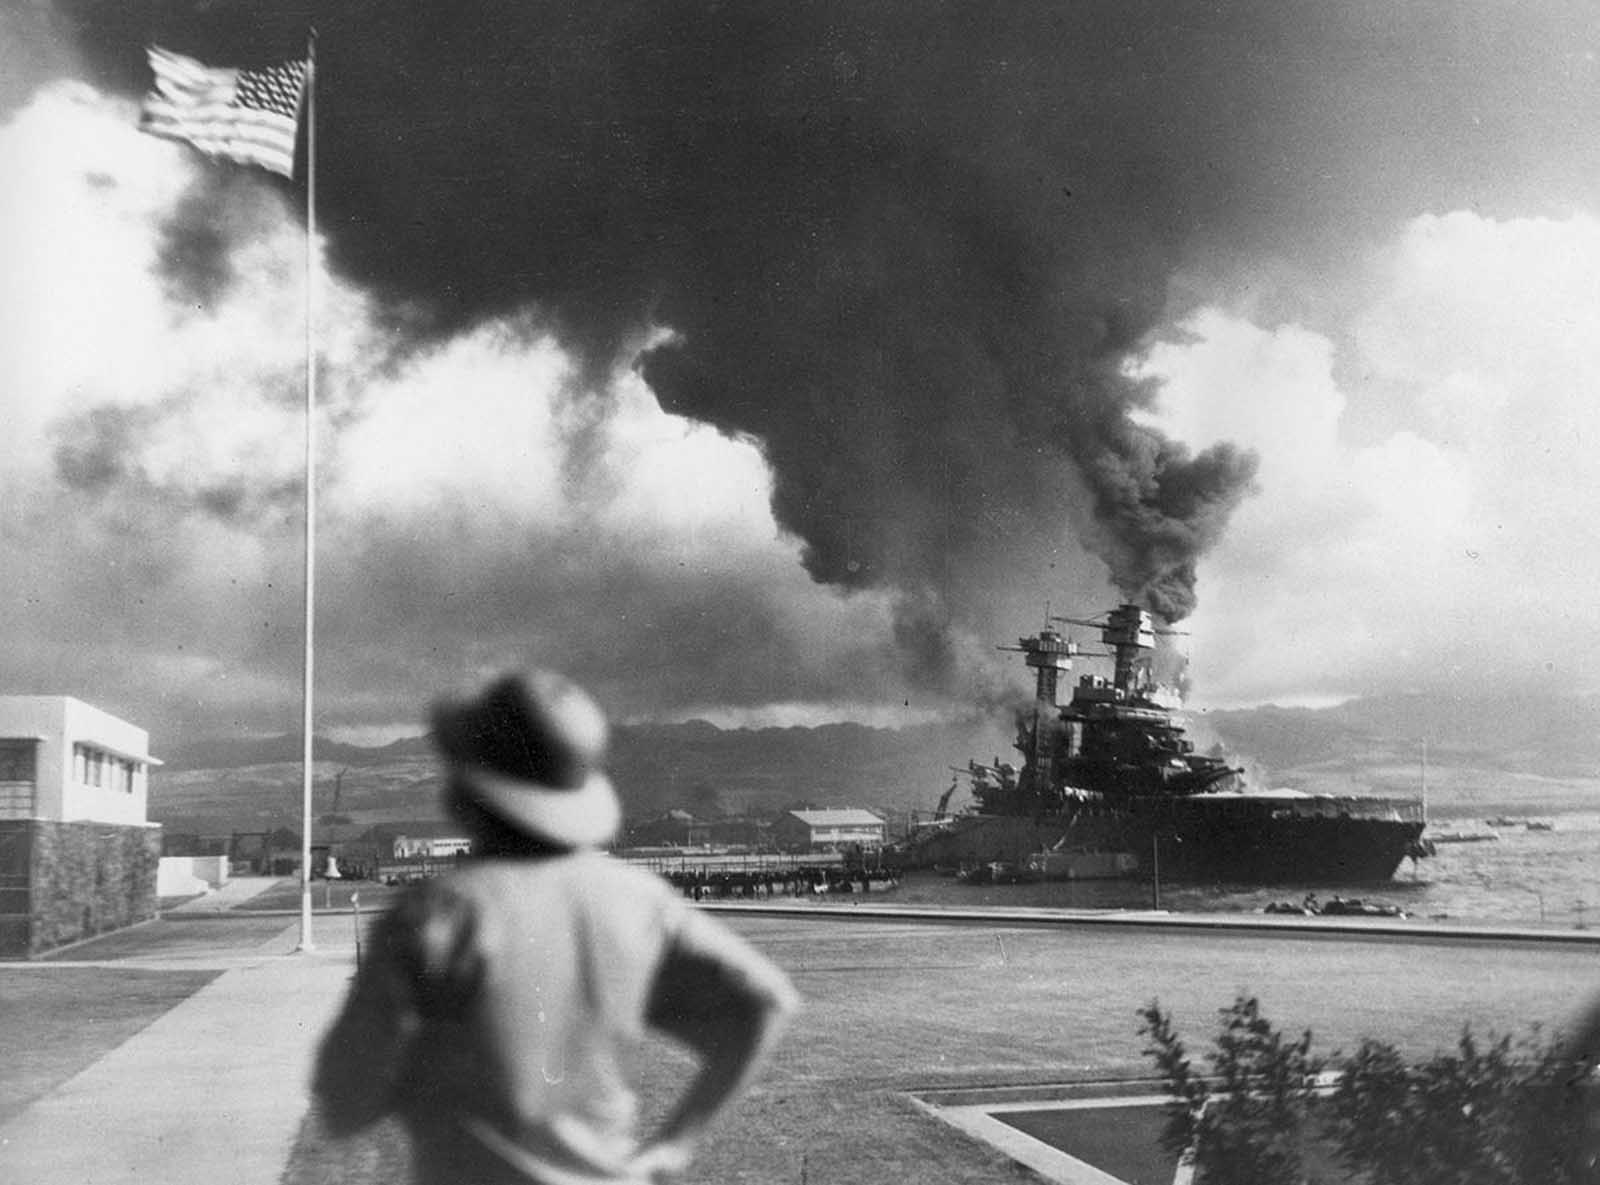 American ships burn during the Japanese attack on Pearl Harbor, Hawaii, on December 7, 1941.